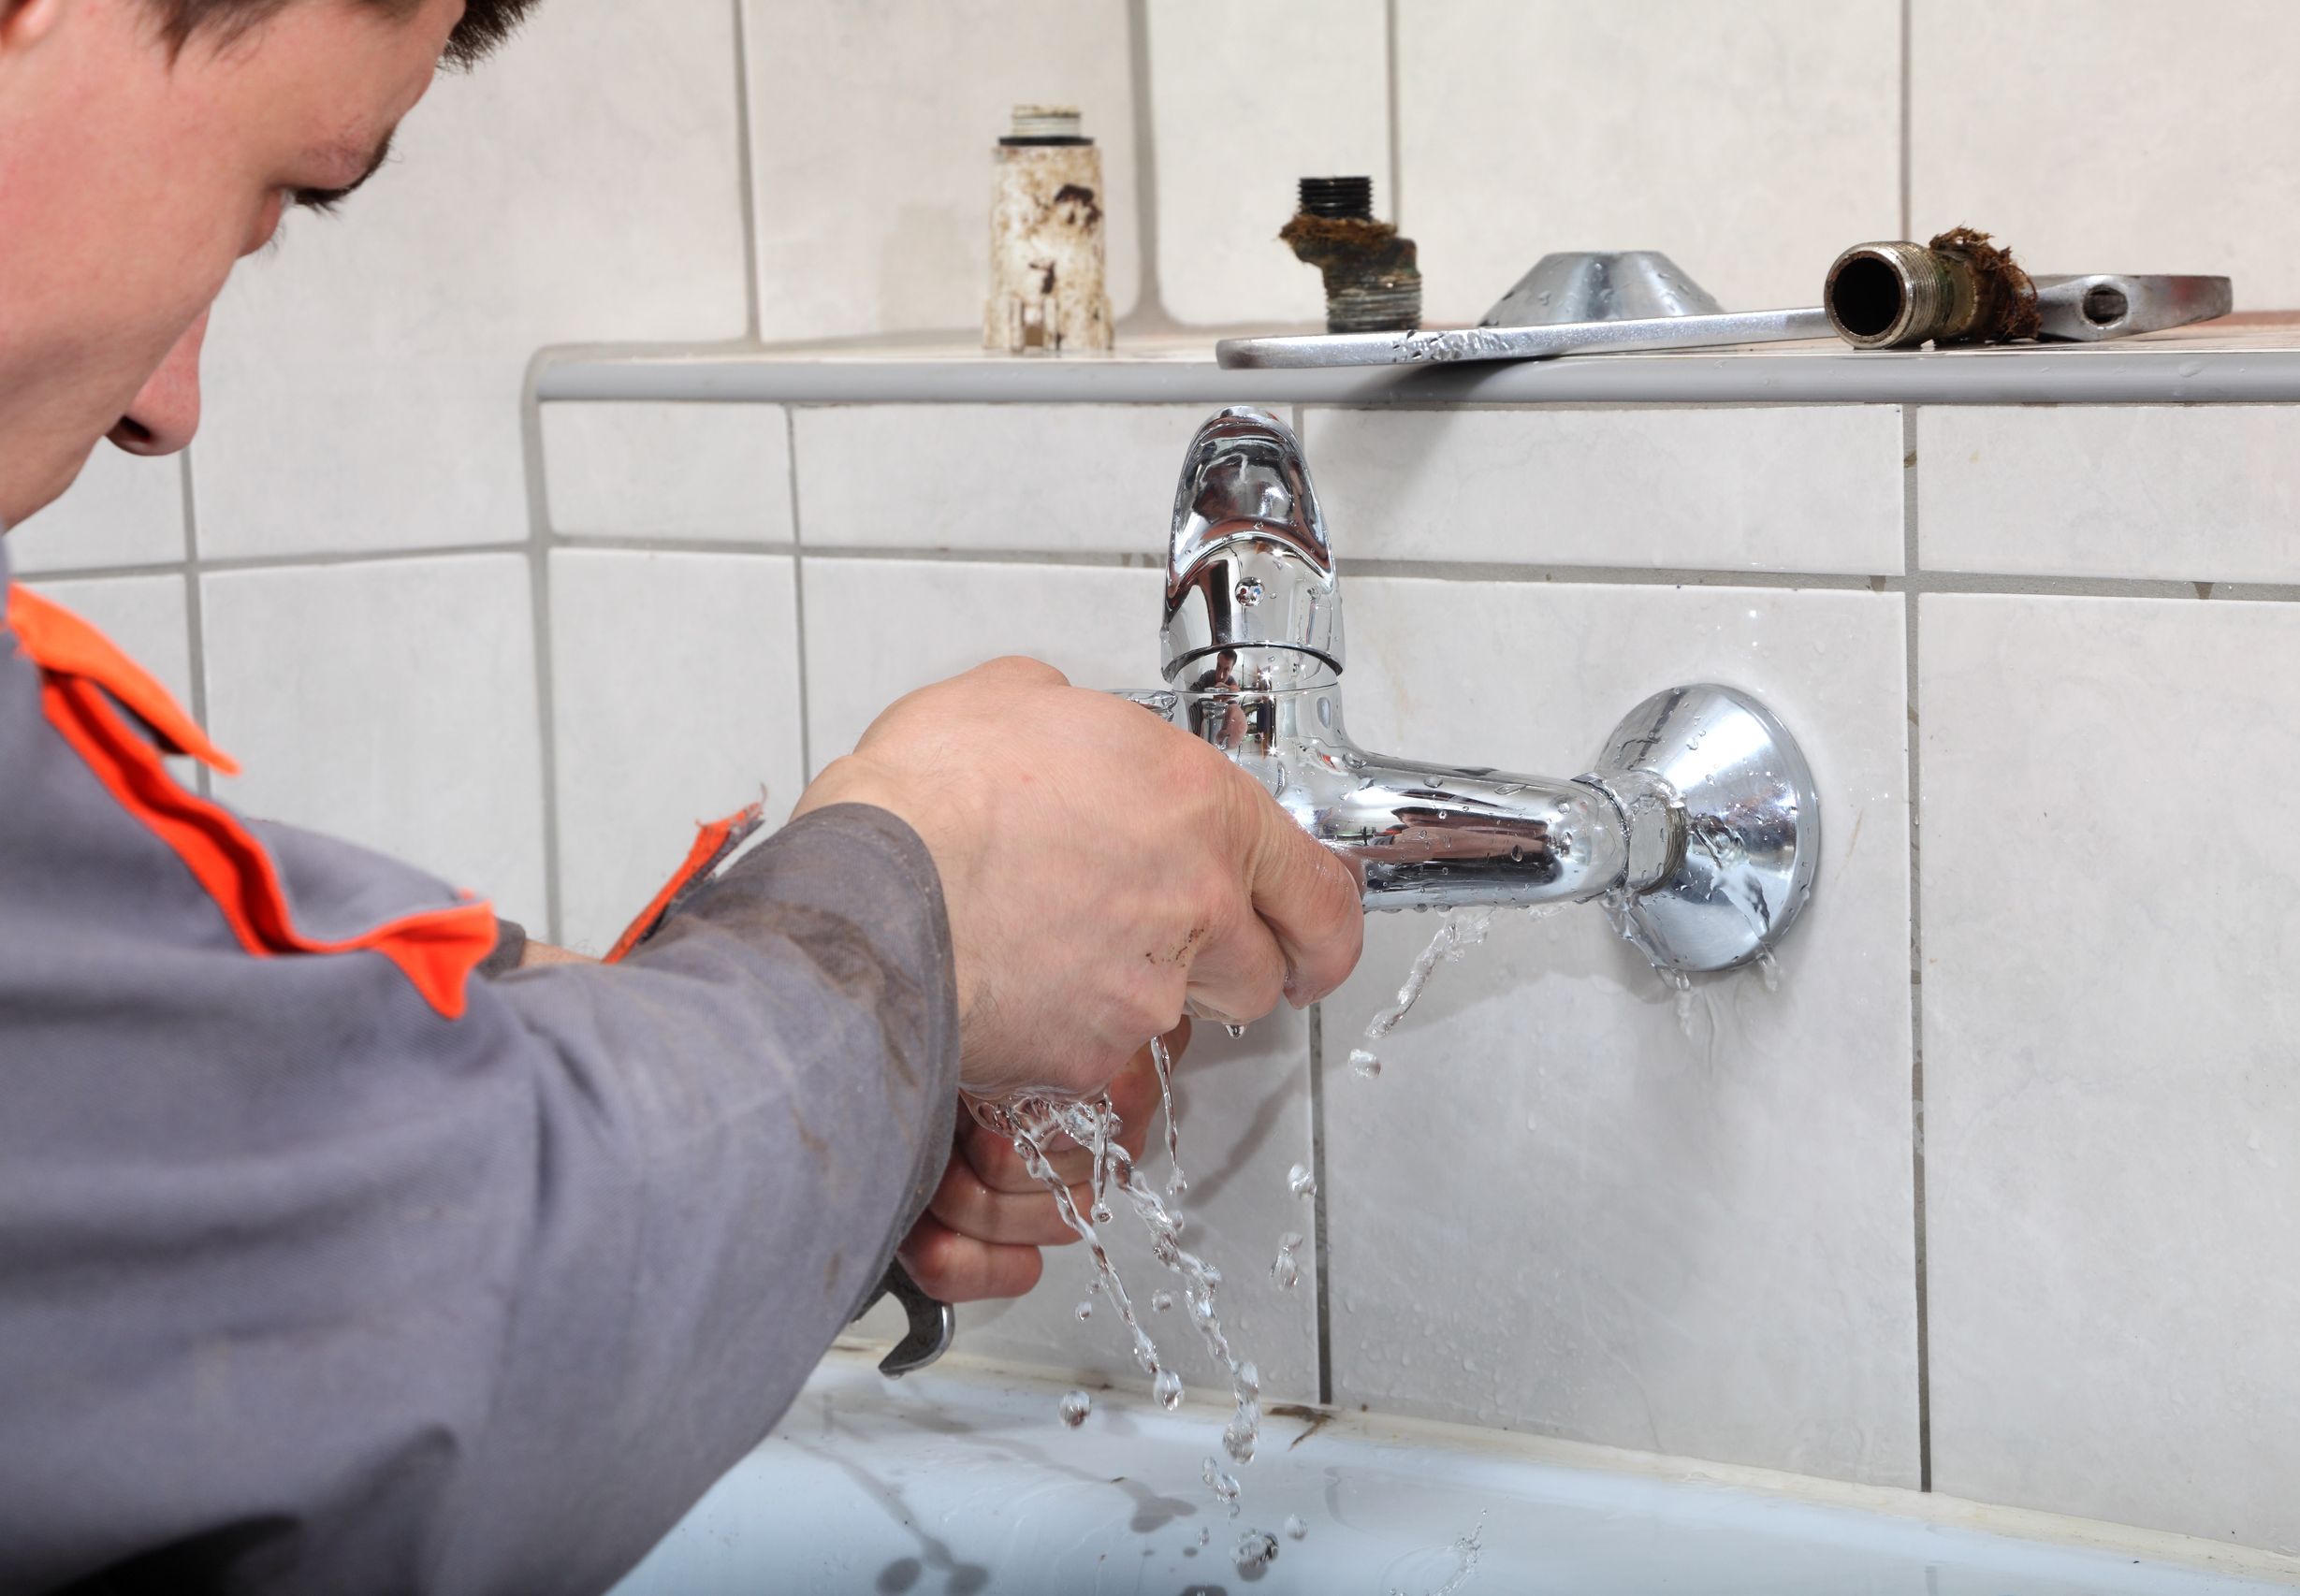 Plumbing Services that May Surprise You